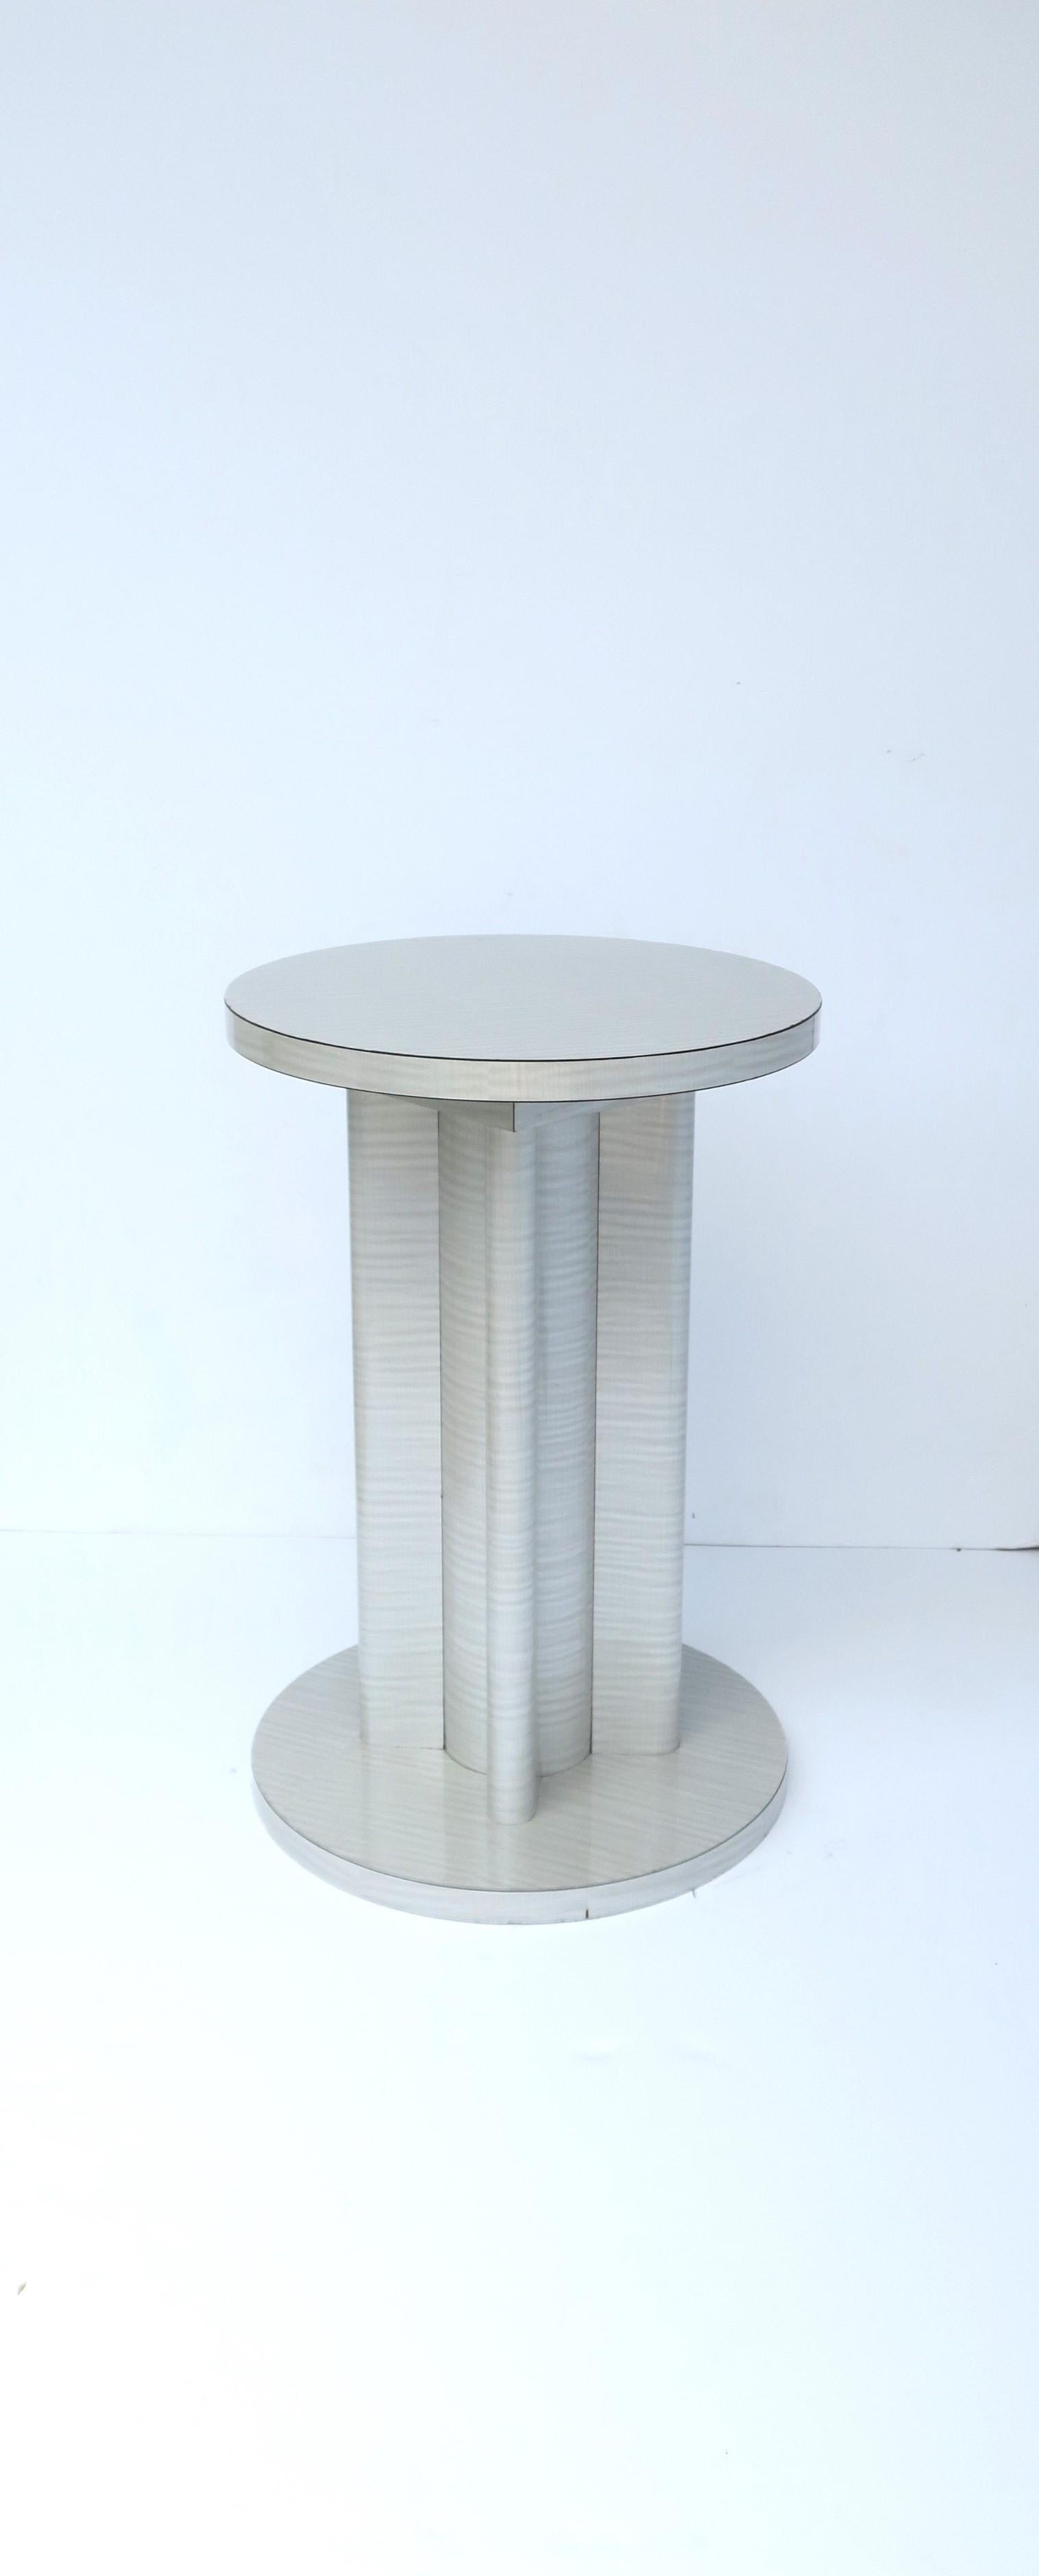 A chic round side drink Gueridon table of the Art Deco Revival '70s Modern period, in silver light-grey laminate, circa 1970s. Table is a convenient size. Dimension: 12.38